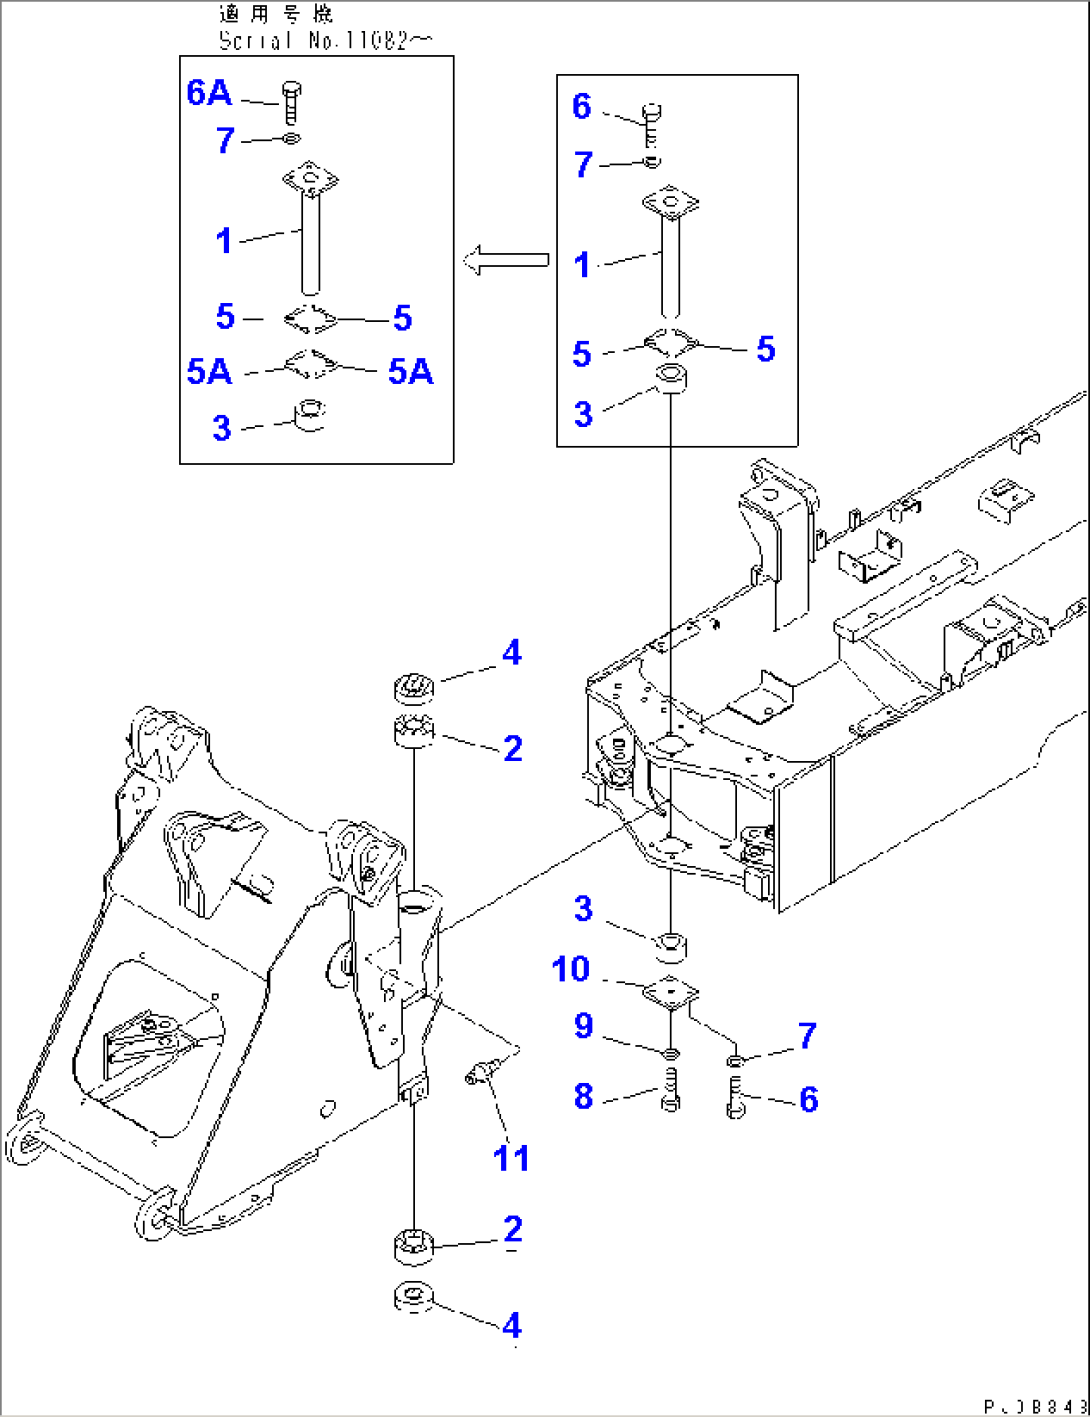 HINGE PIN (FOR FRONT AND REAR FRAME CONNECTING)(#10001-11195)